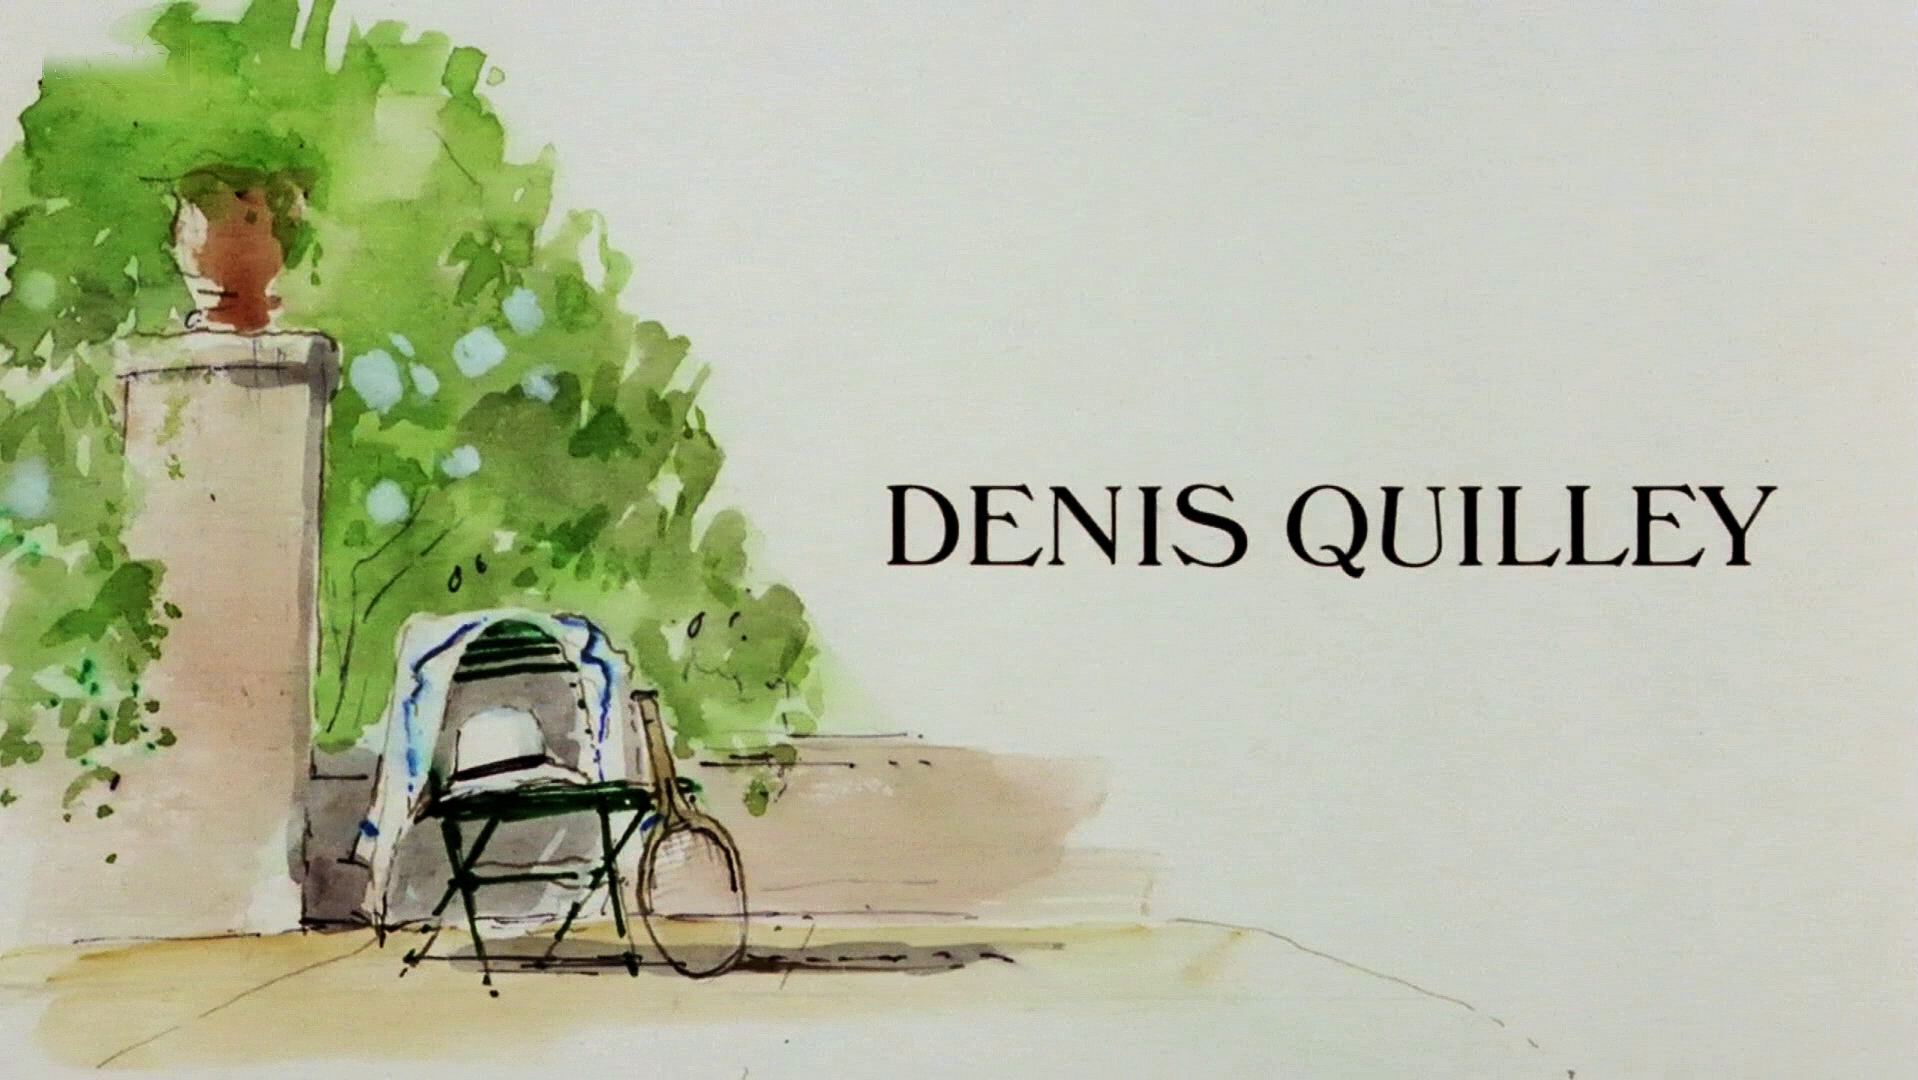 Main title from Evil Under the Sun (1982) (9). Denis Quilley